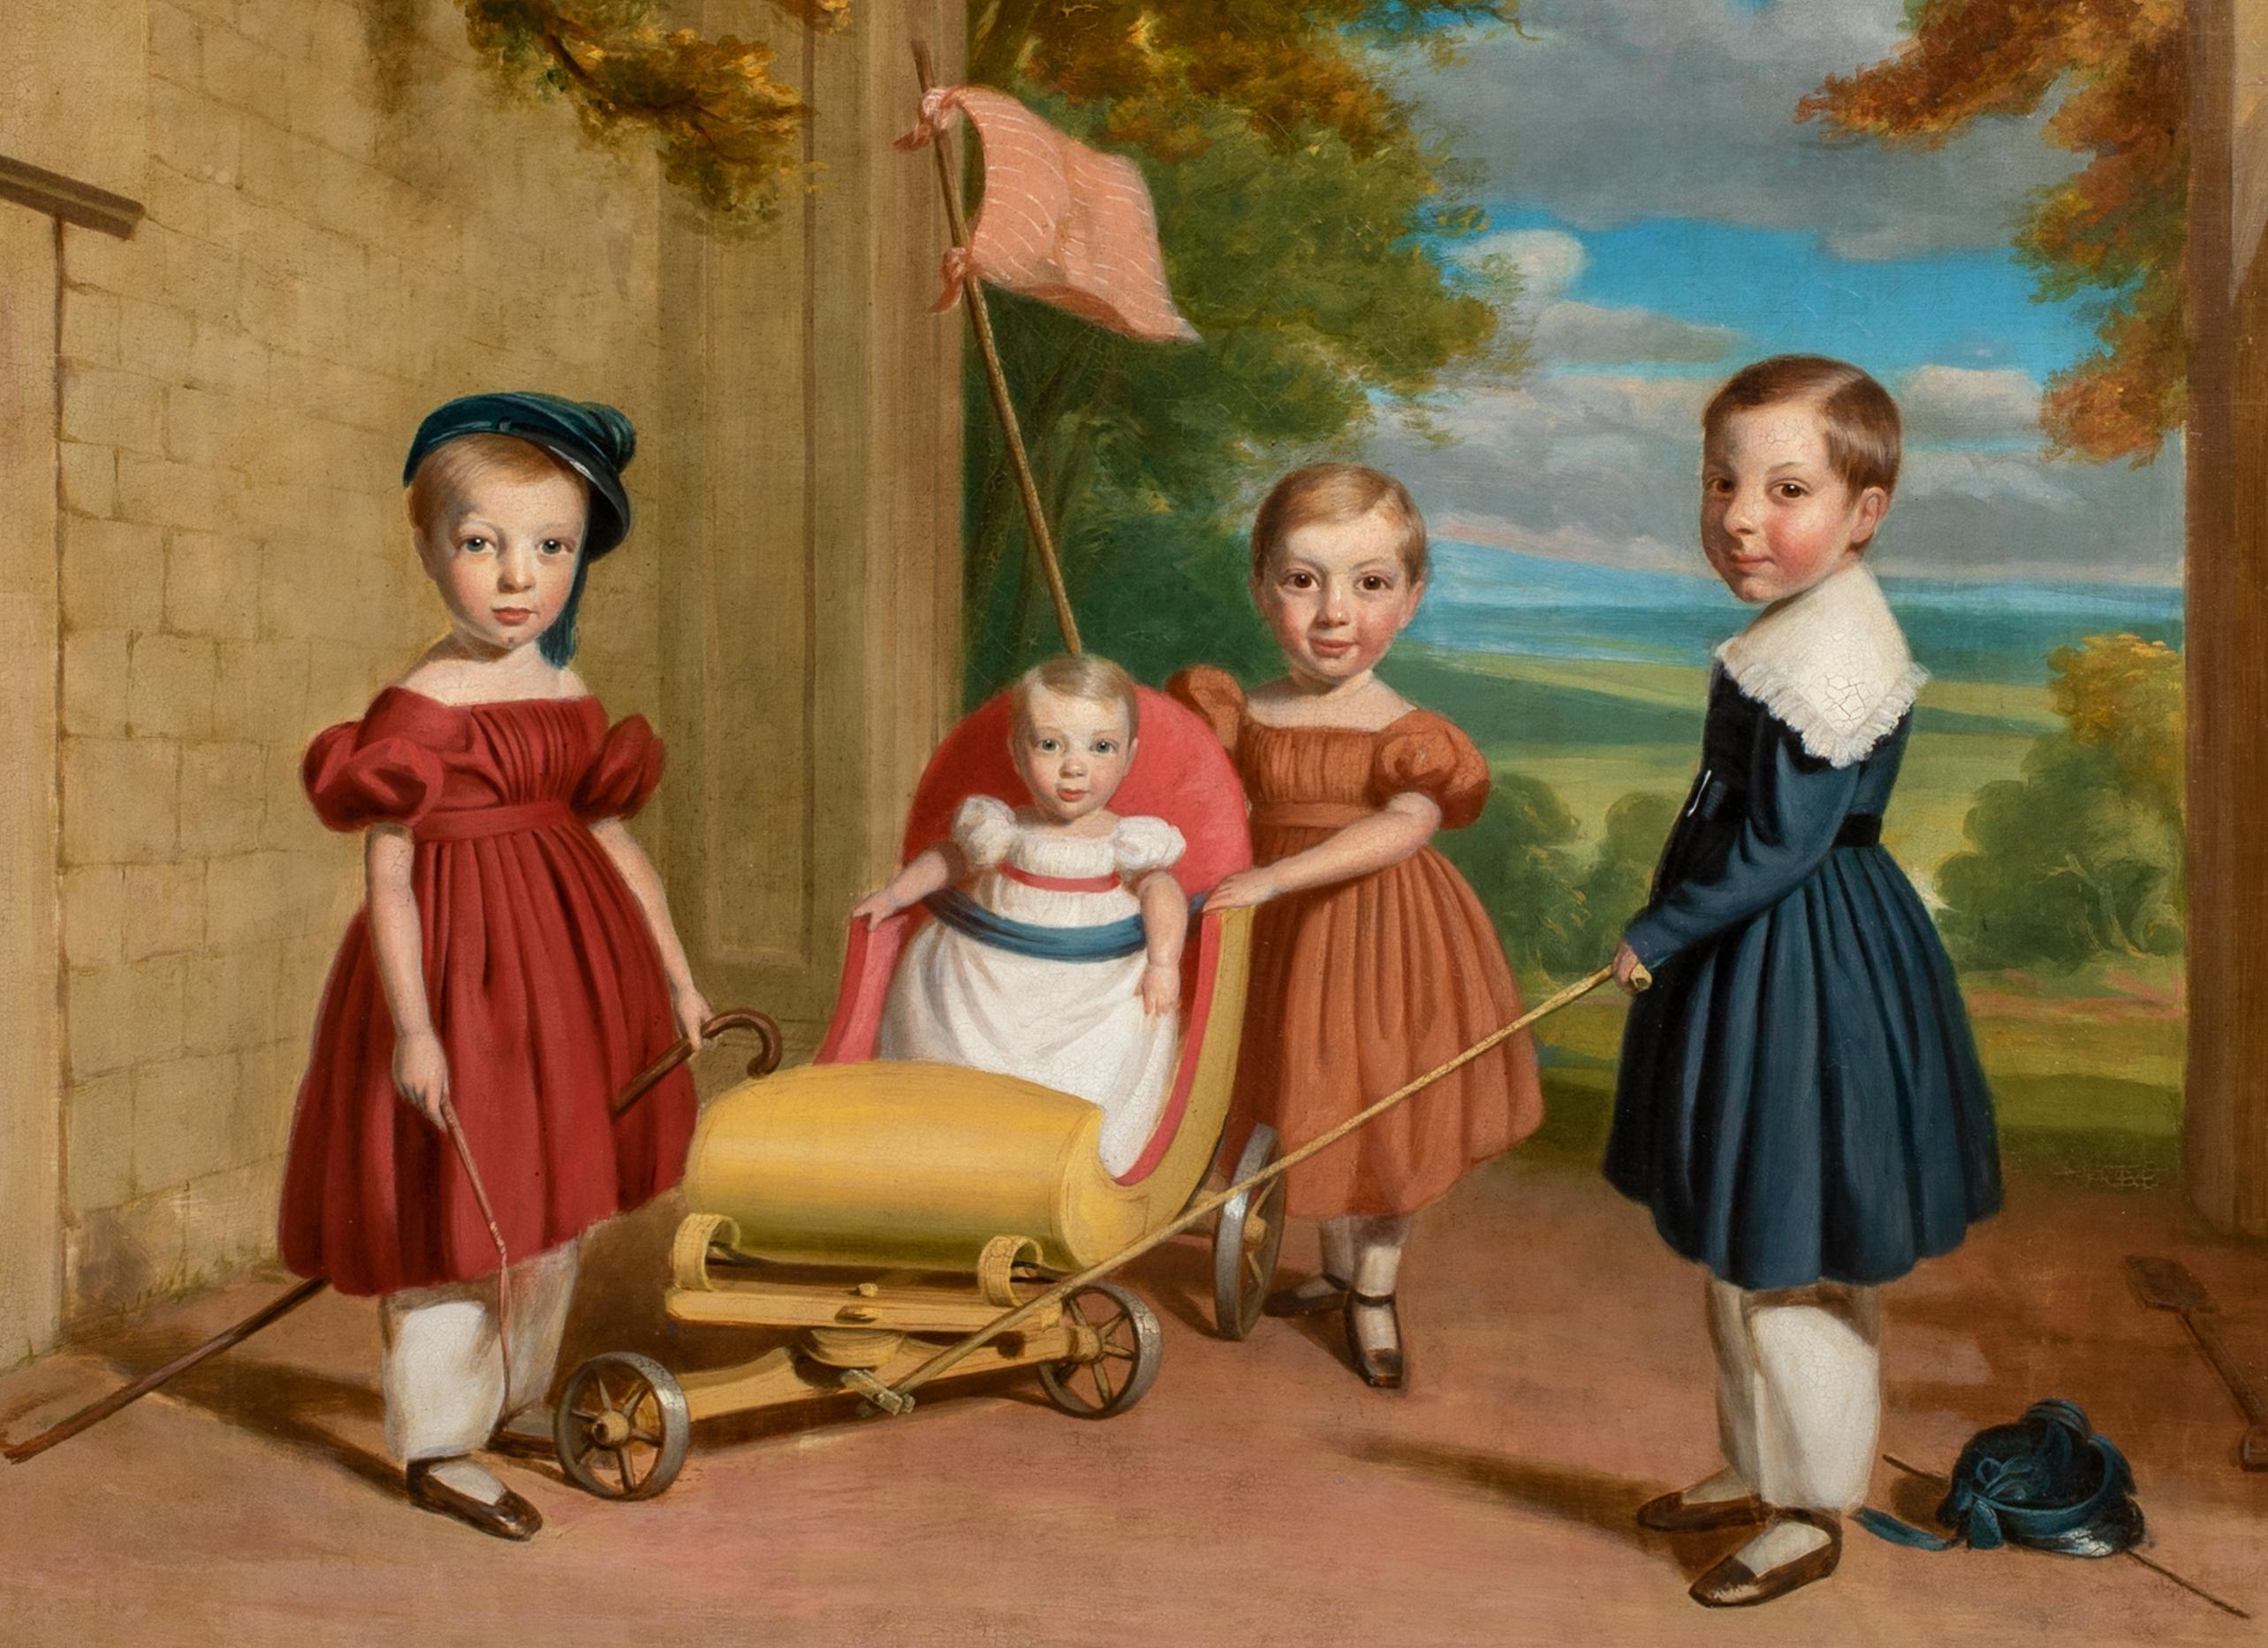 Portrait Of Children Playing, 19th Century

American School

Large 19th Century American School portrait of four children playing, oil on canvas. Excellent quality and condition charming portrait of a group of children in elaborate dress at the